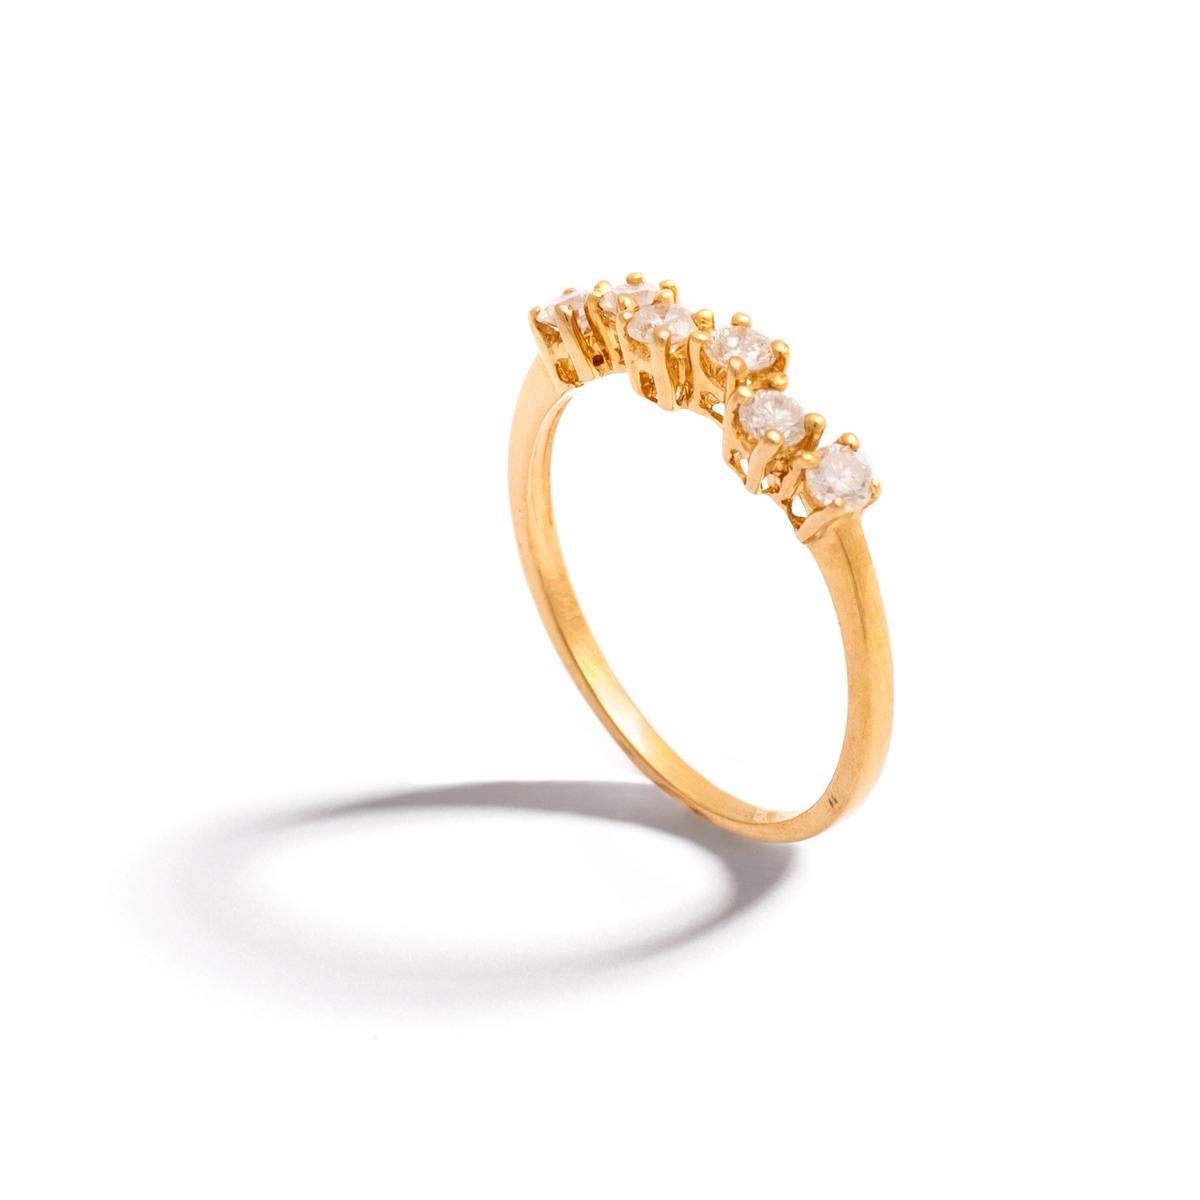 Diamond round cut on yellow gold ring.
Diamond estimated weight: 0.42 carat total.
Modern cut. Estimated to be H-I color and Si clarity.
Ring Size: 7.
Gross weight: 1.95 grams.